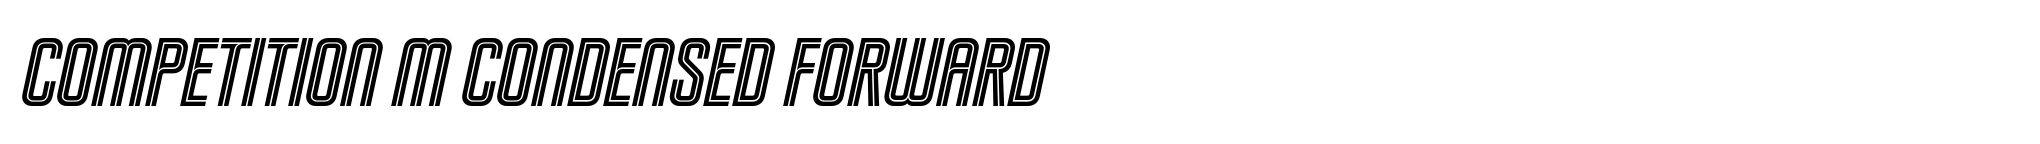 Competition M Condensed Forward image